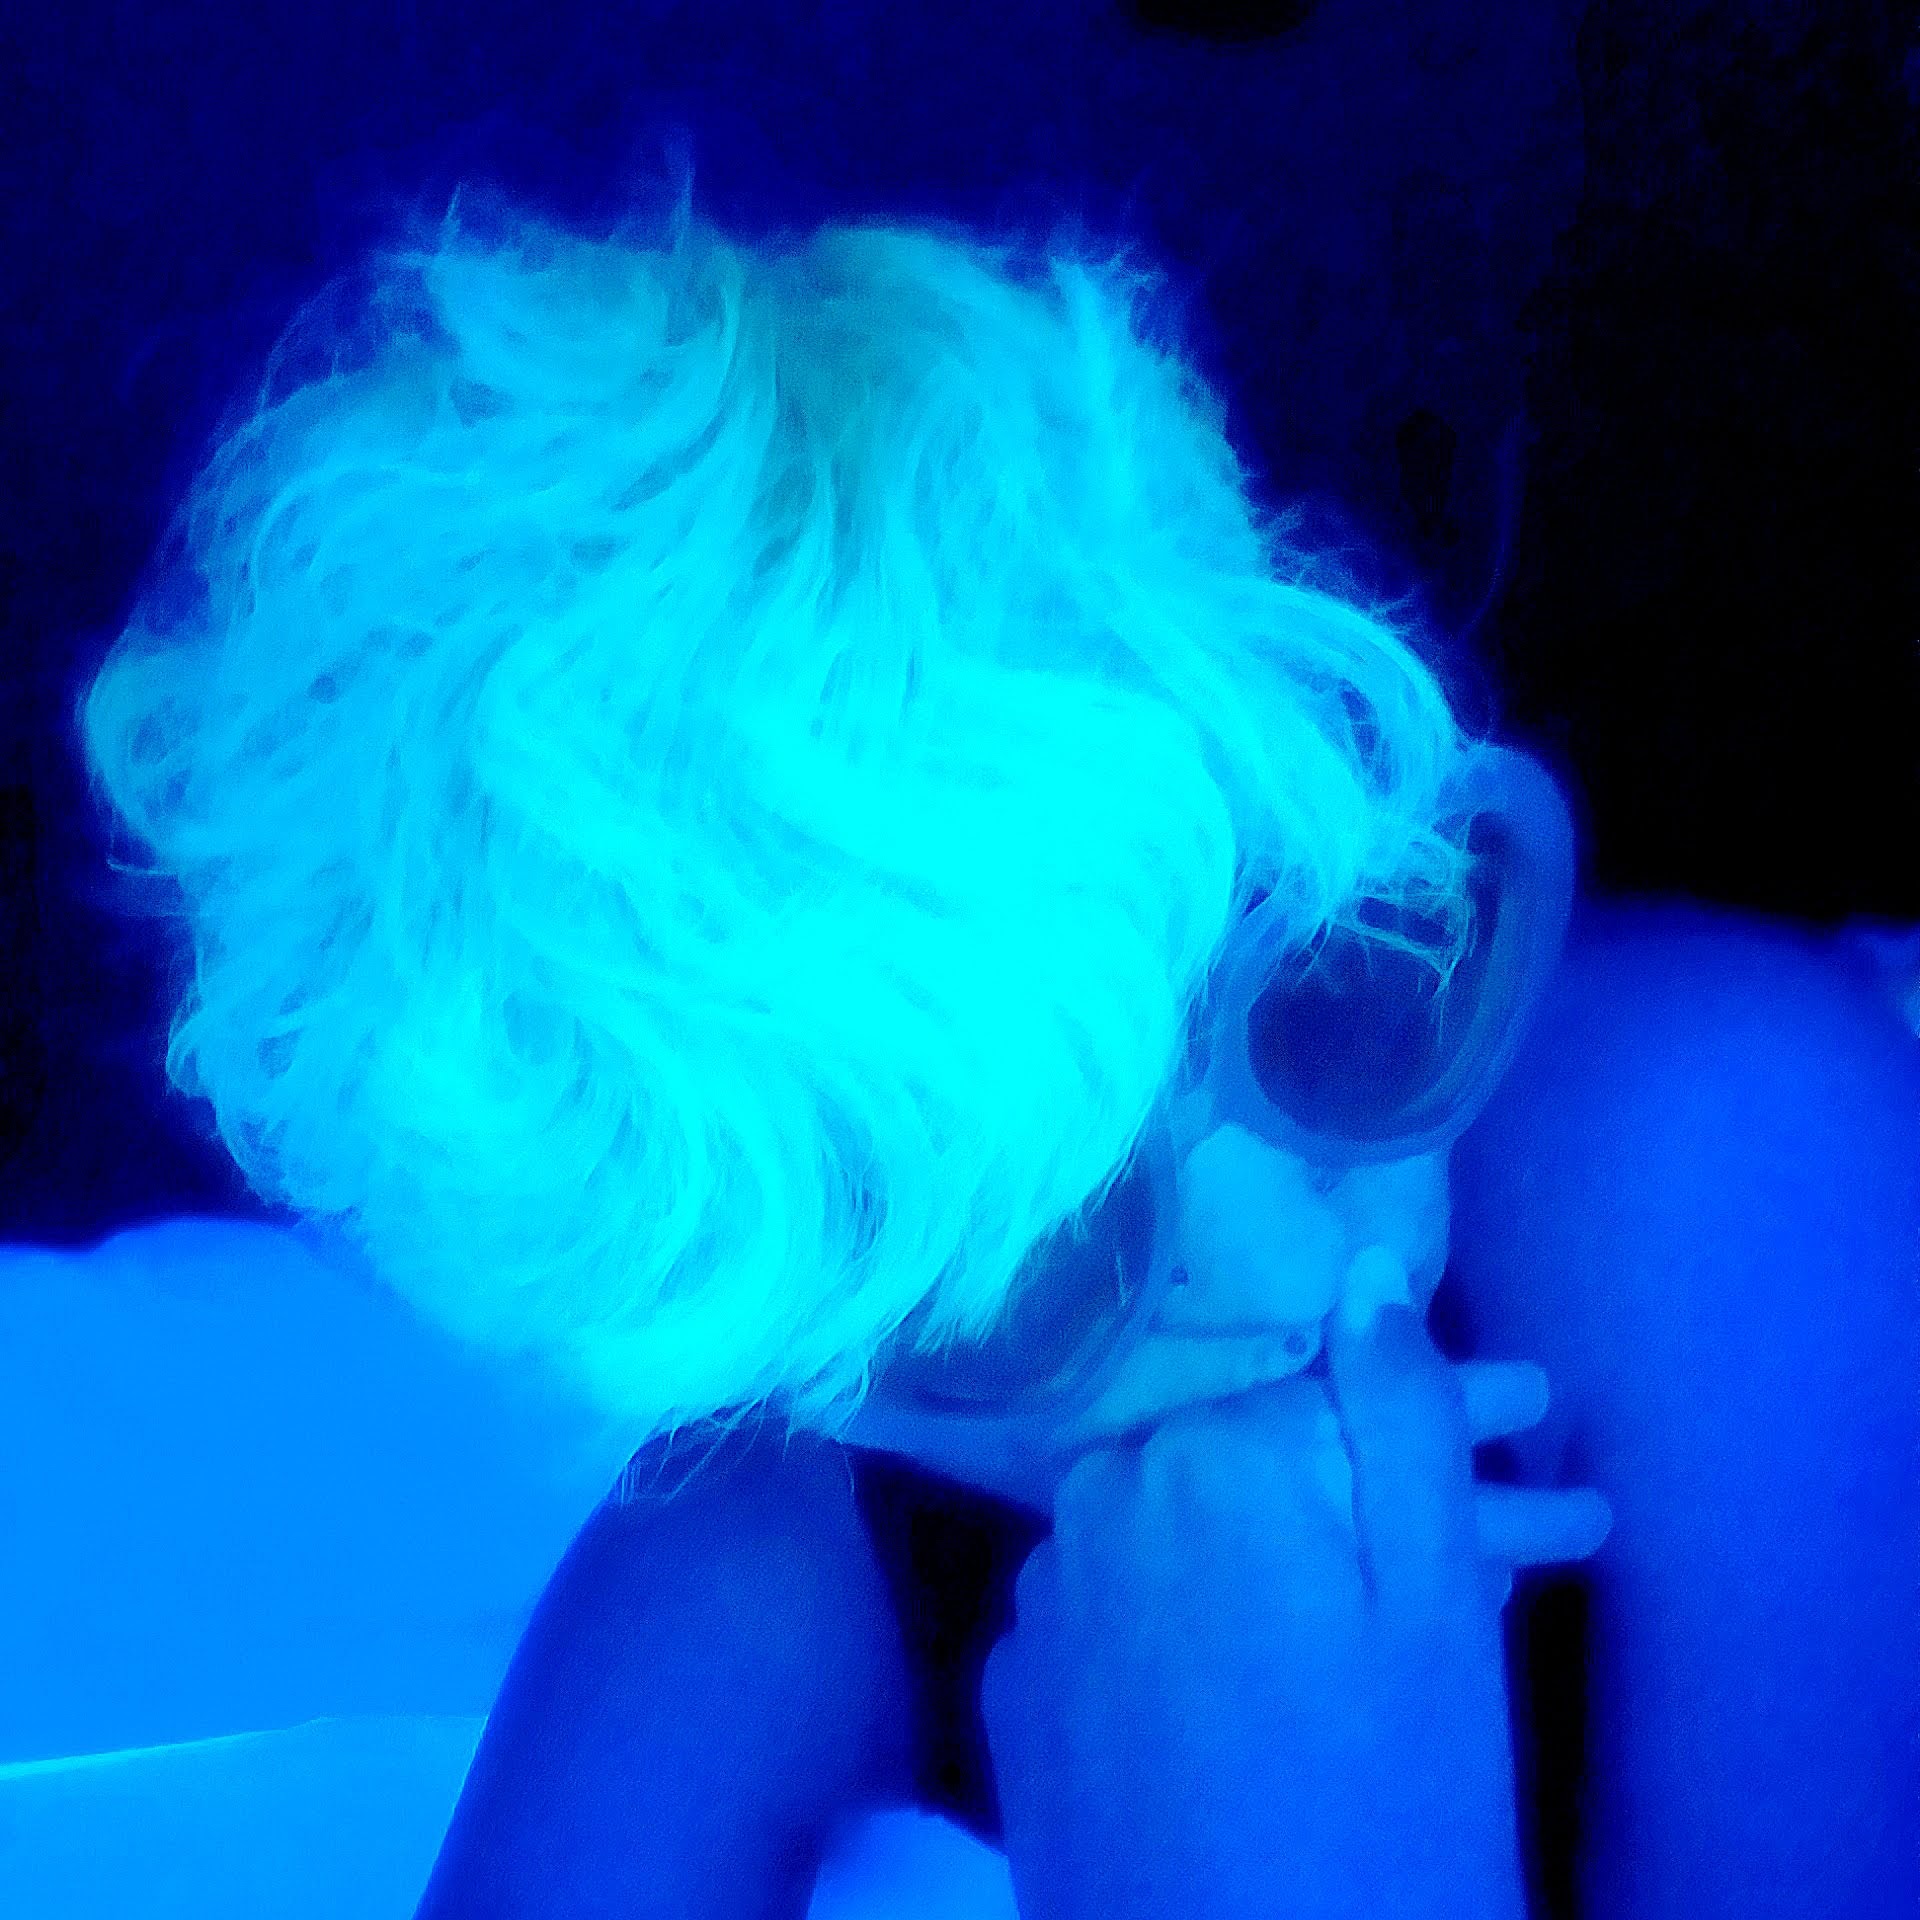 [Image description: Photo of Diamanto Sala. There is a heavy blue filter on the photo of Diamanto in a pensive pose. They are wearing large sunglasses and their short wavy hair is glowing in the blue light.]